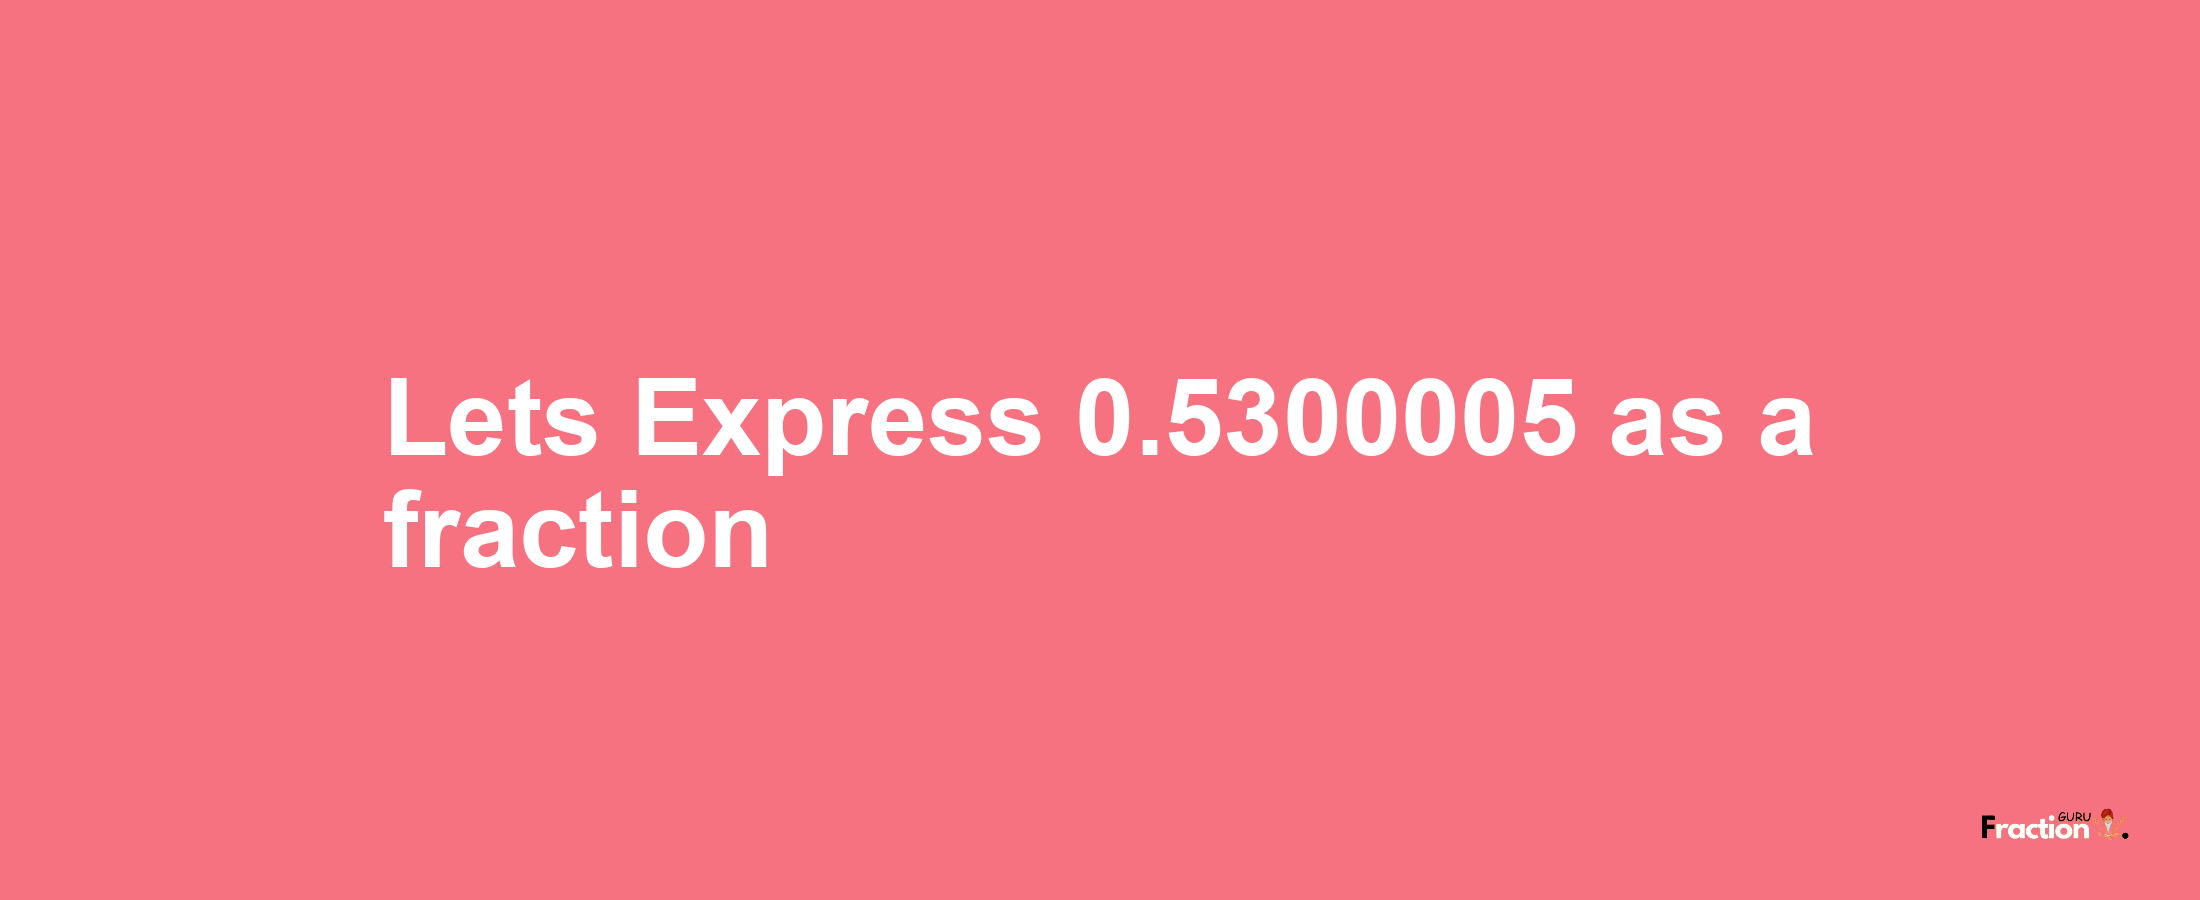 Lets Express 0.5300005 as afraction